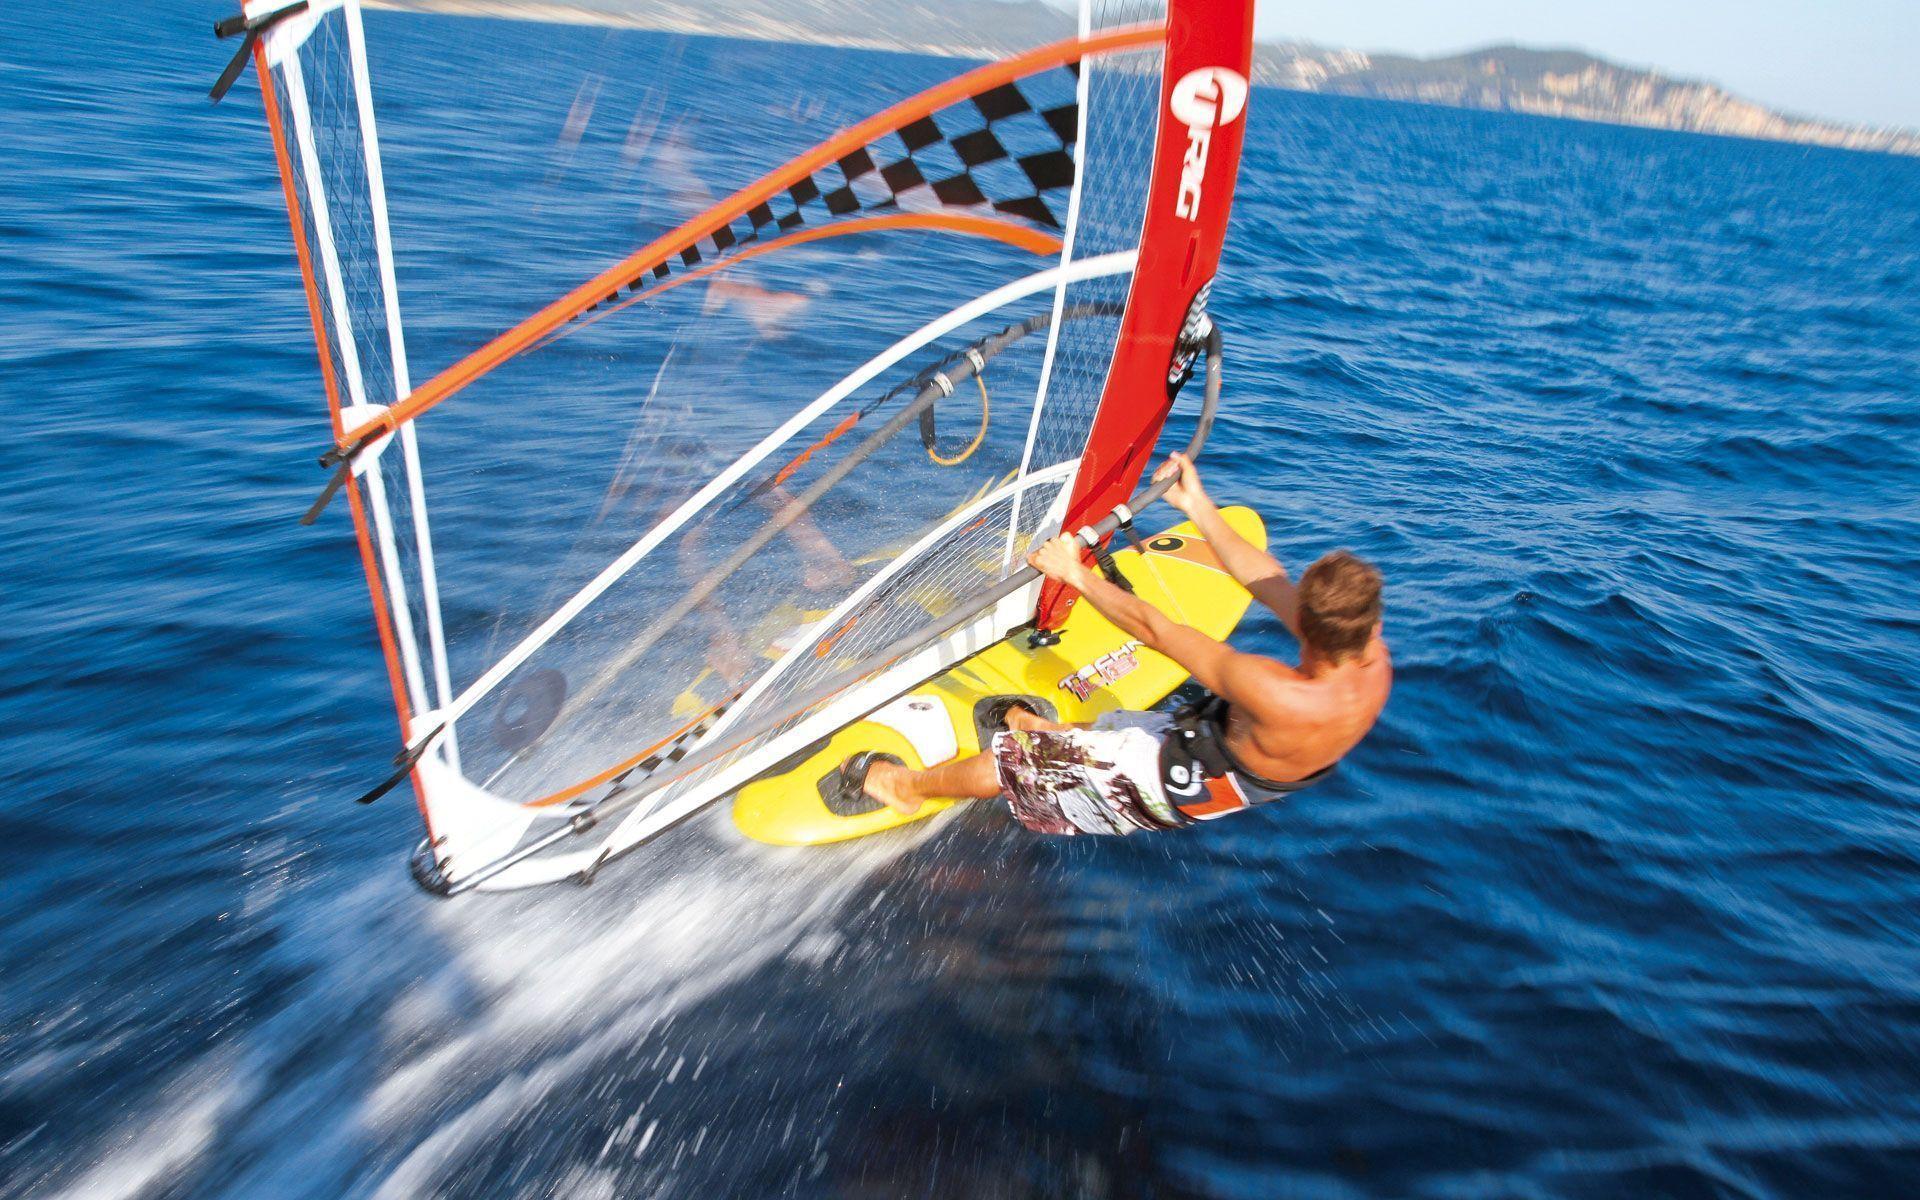 Wallpapers windsurf with Bic Sport